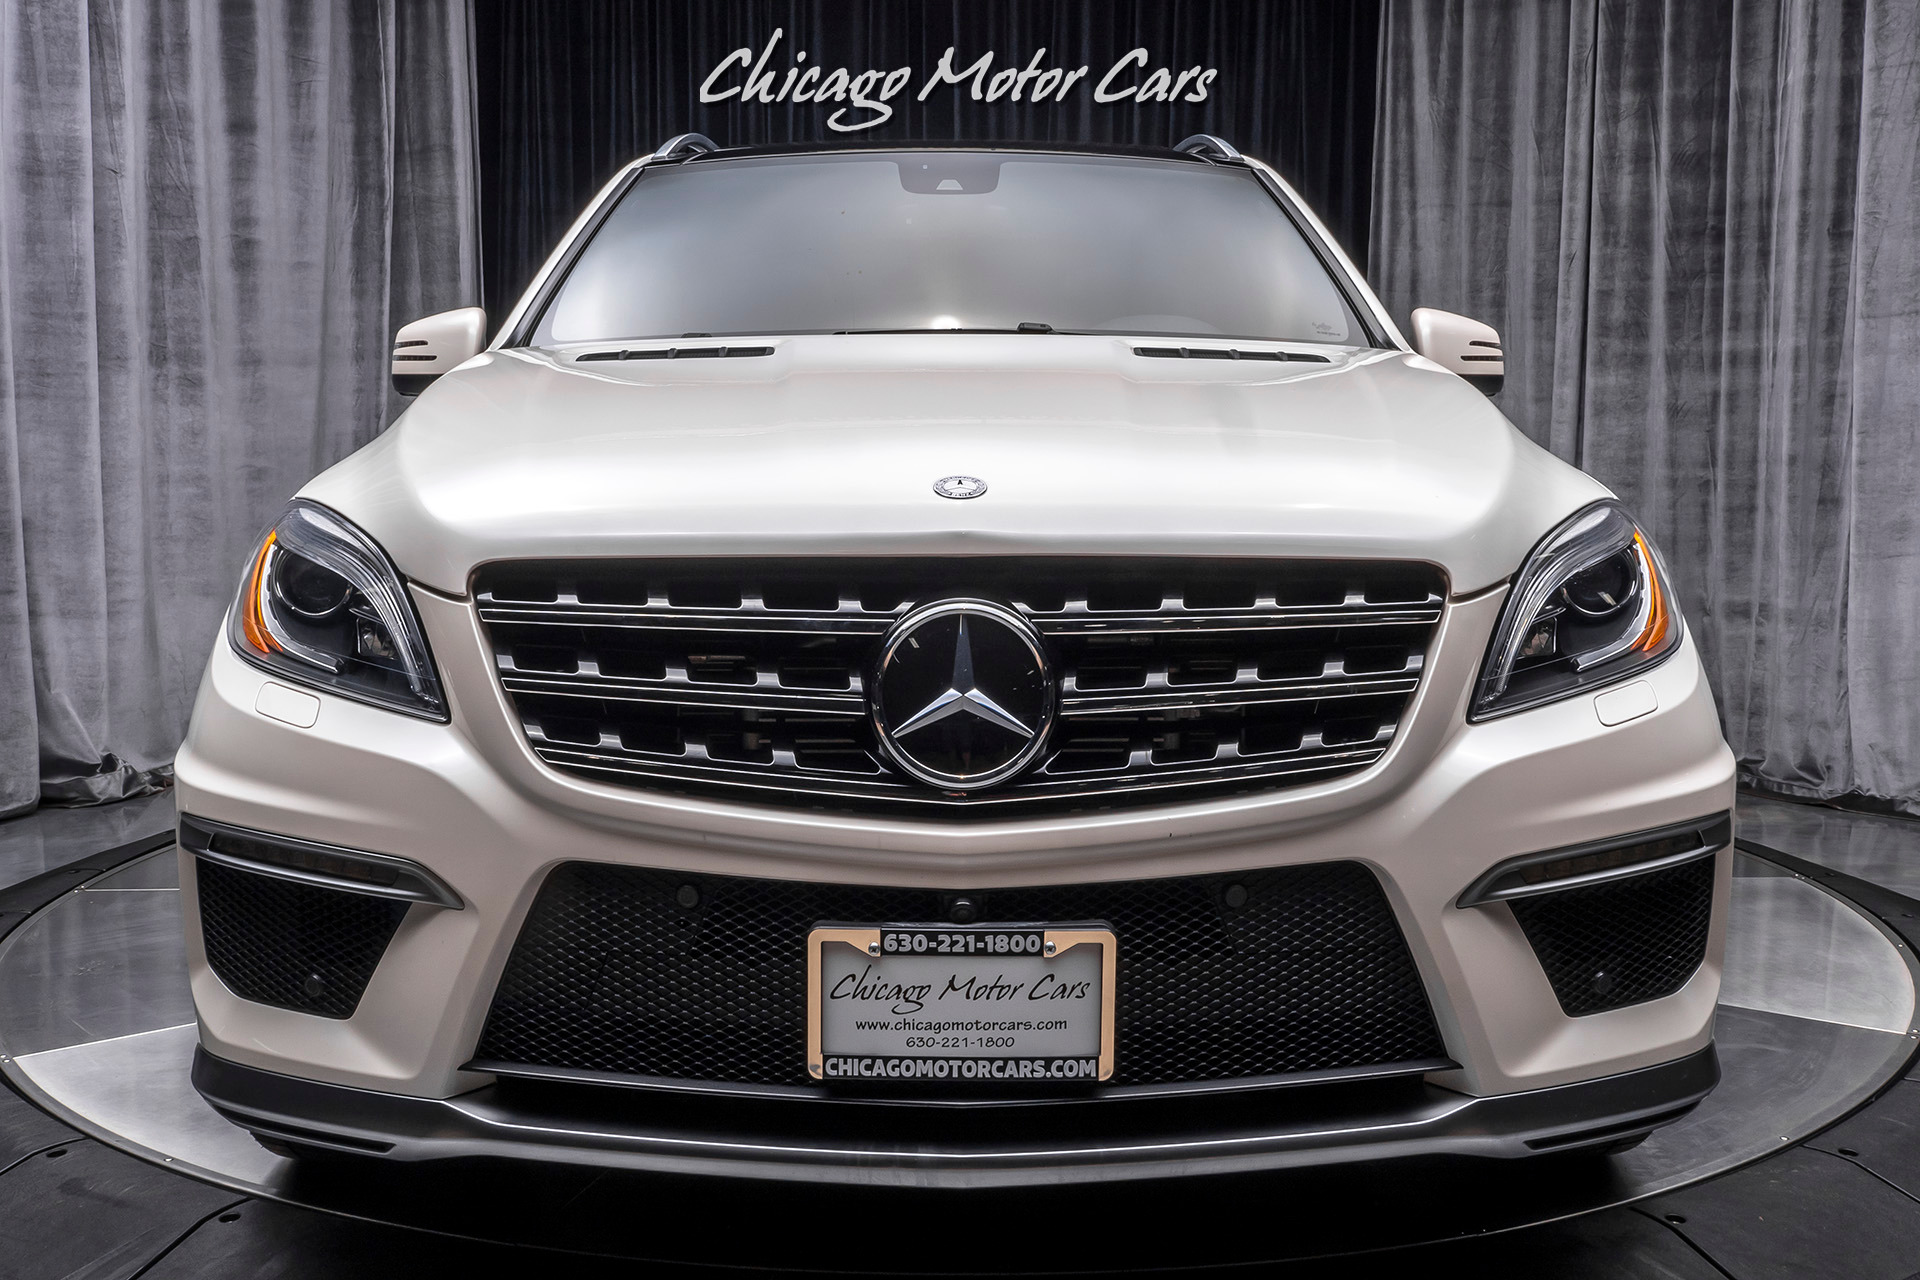 Used-2014-Mercedes-Benz-ML63-AMG-SUV-MSRP-118K